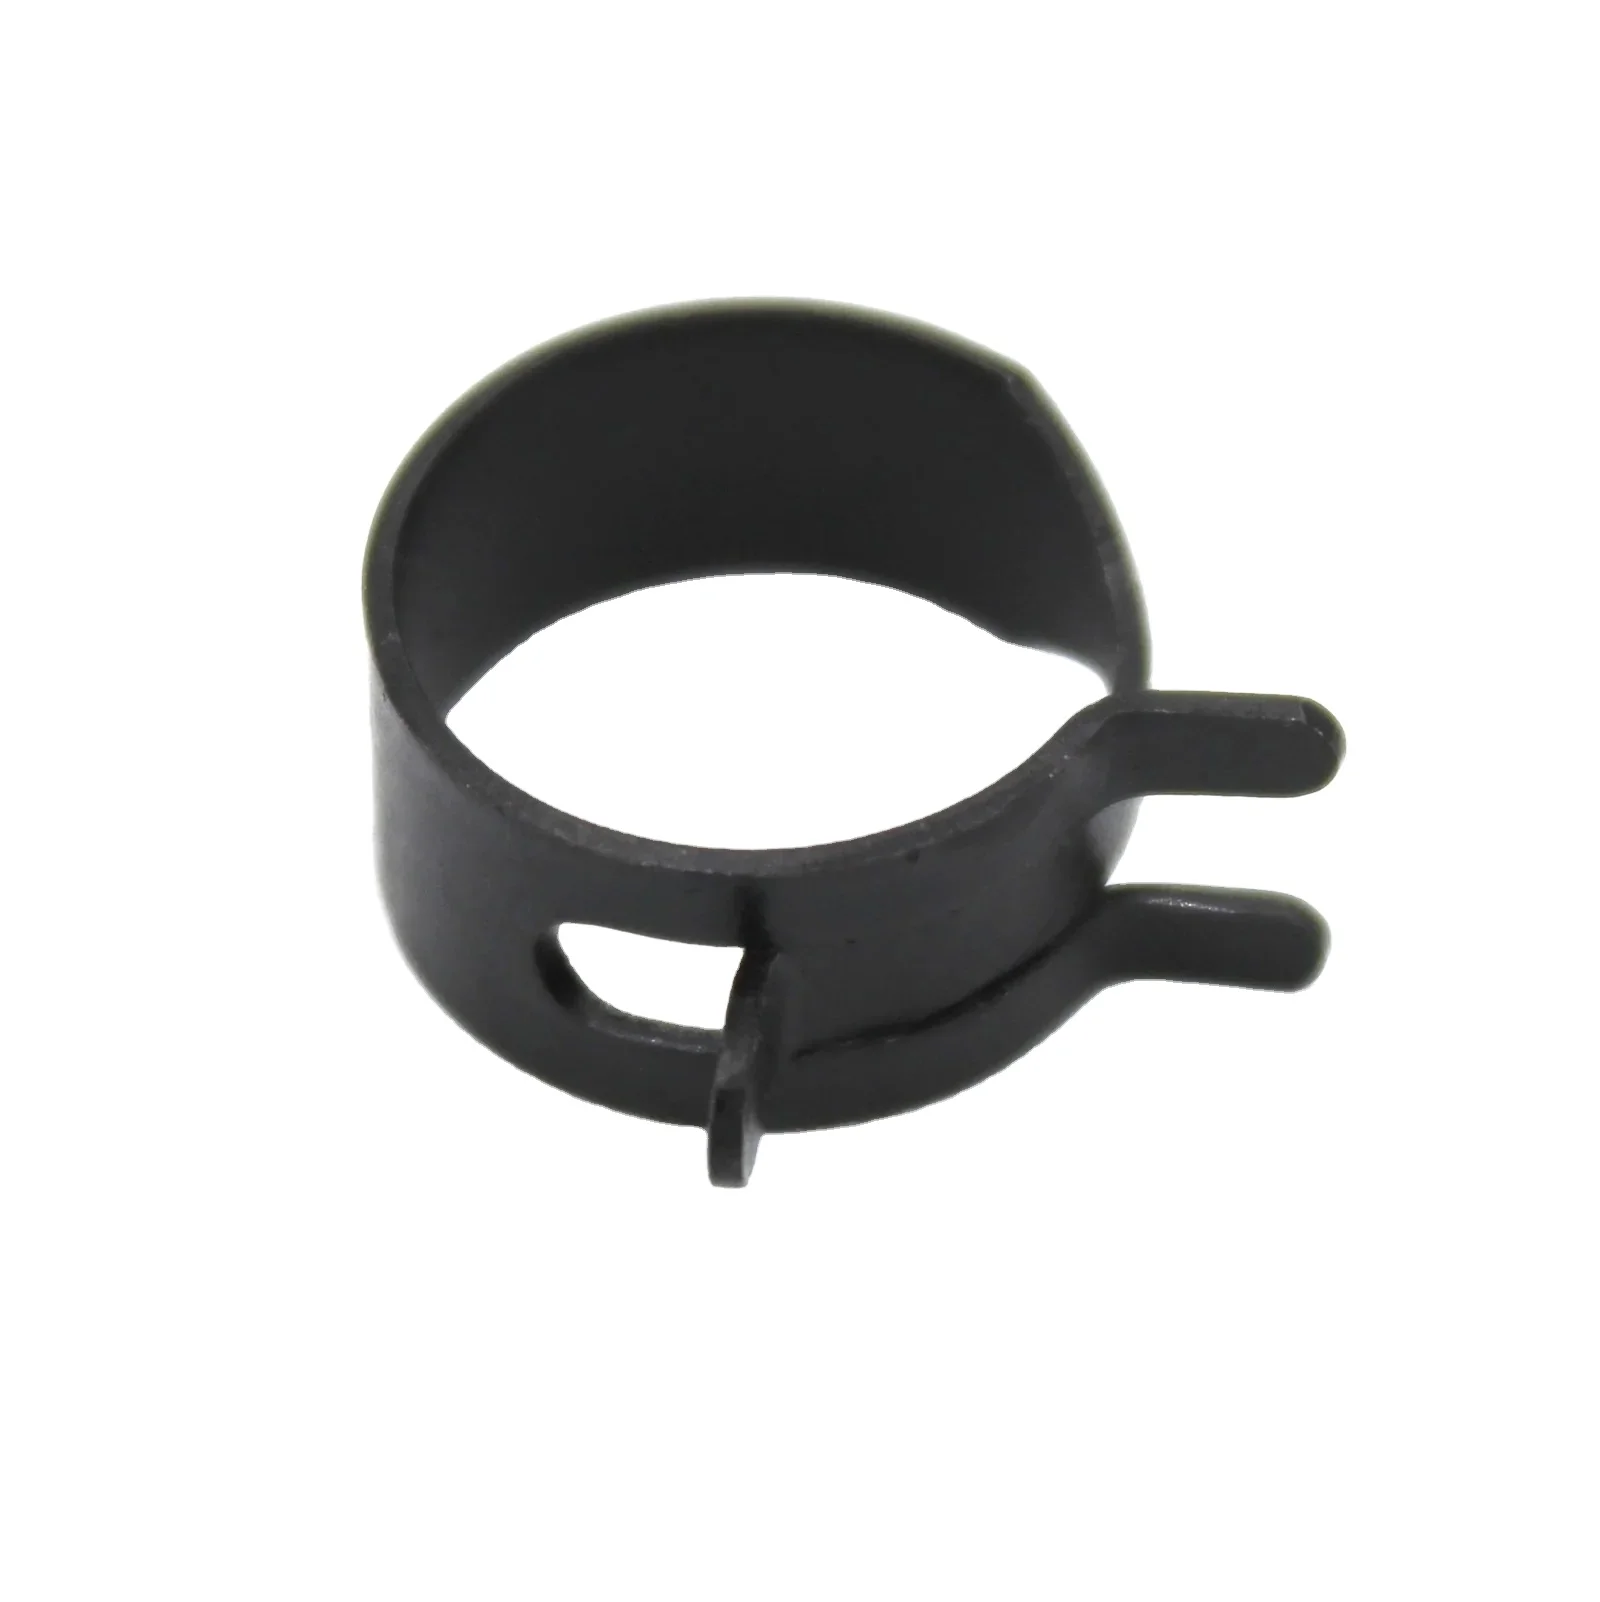 Adjustable Dacromet Black Coated Hose Clamp Spring Clip Steel Hose Clamping with Good Price